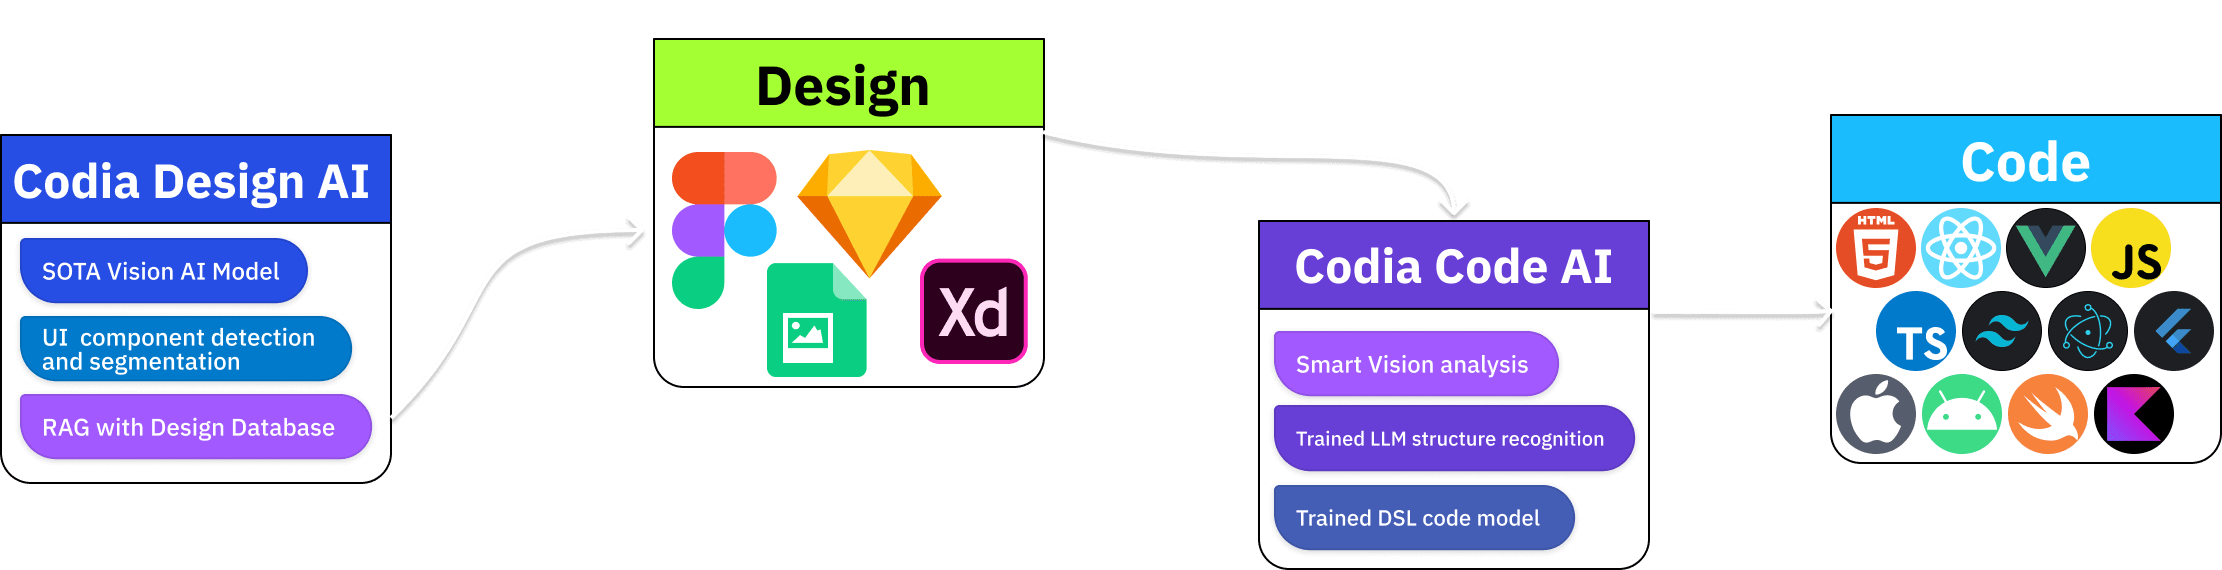 Our tech enhances creative and development workflows with innovative AI in design and coding